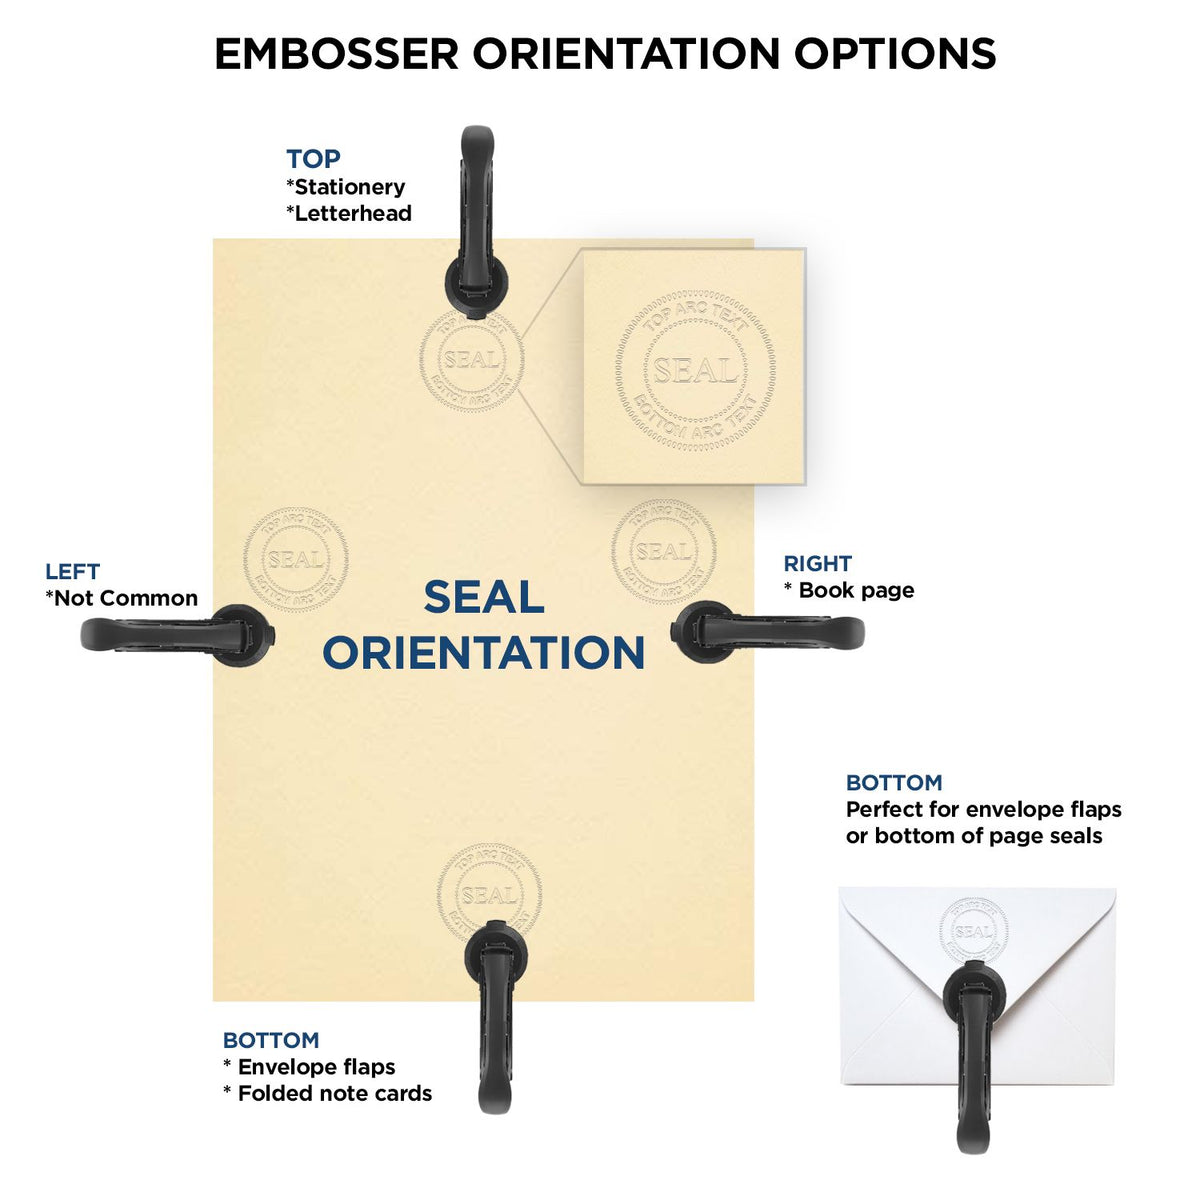 An infographic for the Handheld Illinois Professional Geologist Embosser showing embosser orientation, this is showing examples of a top, bottom, right and left insert.